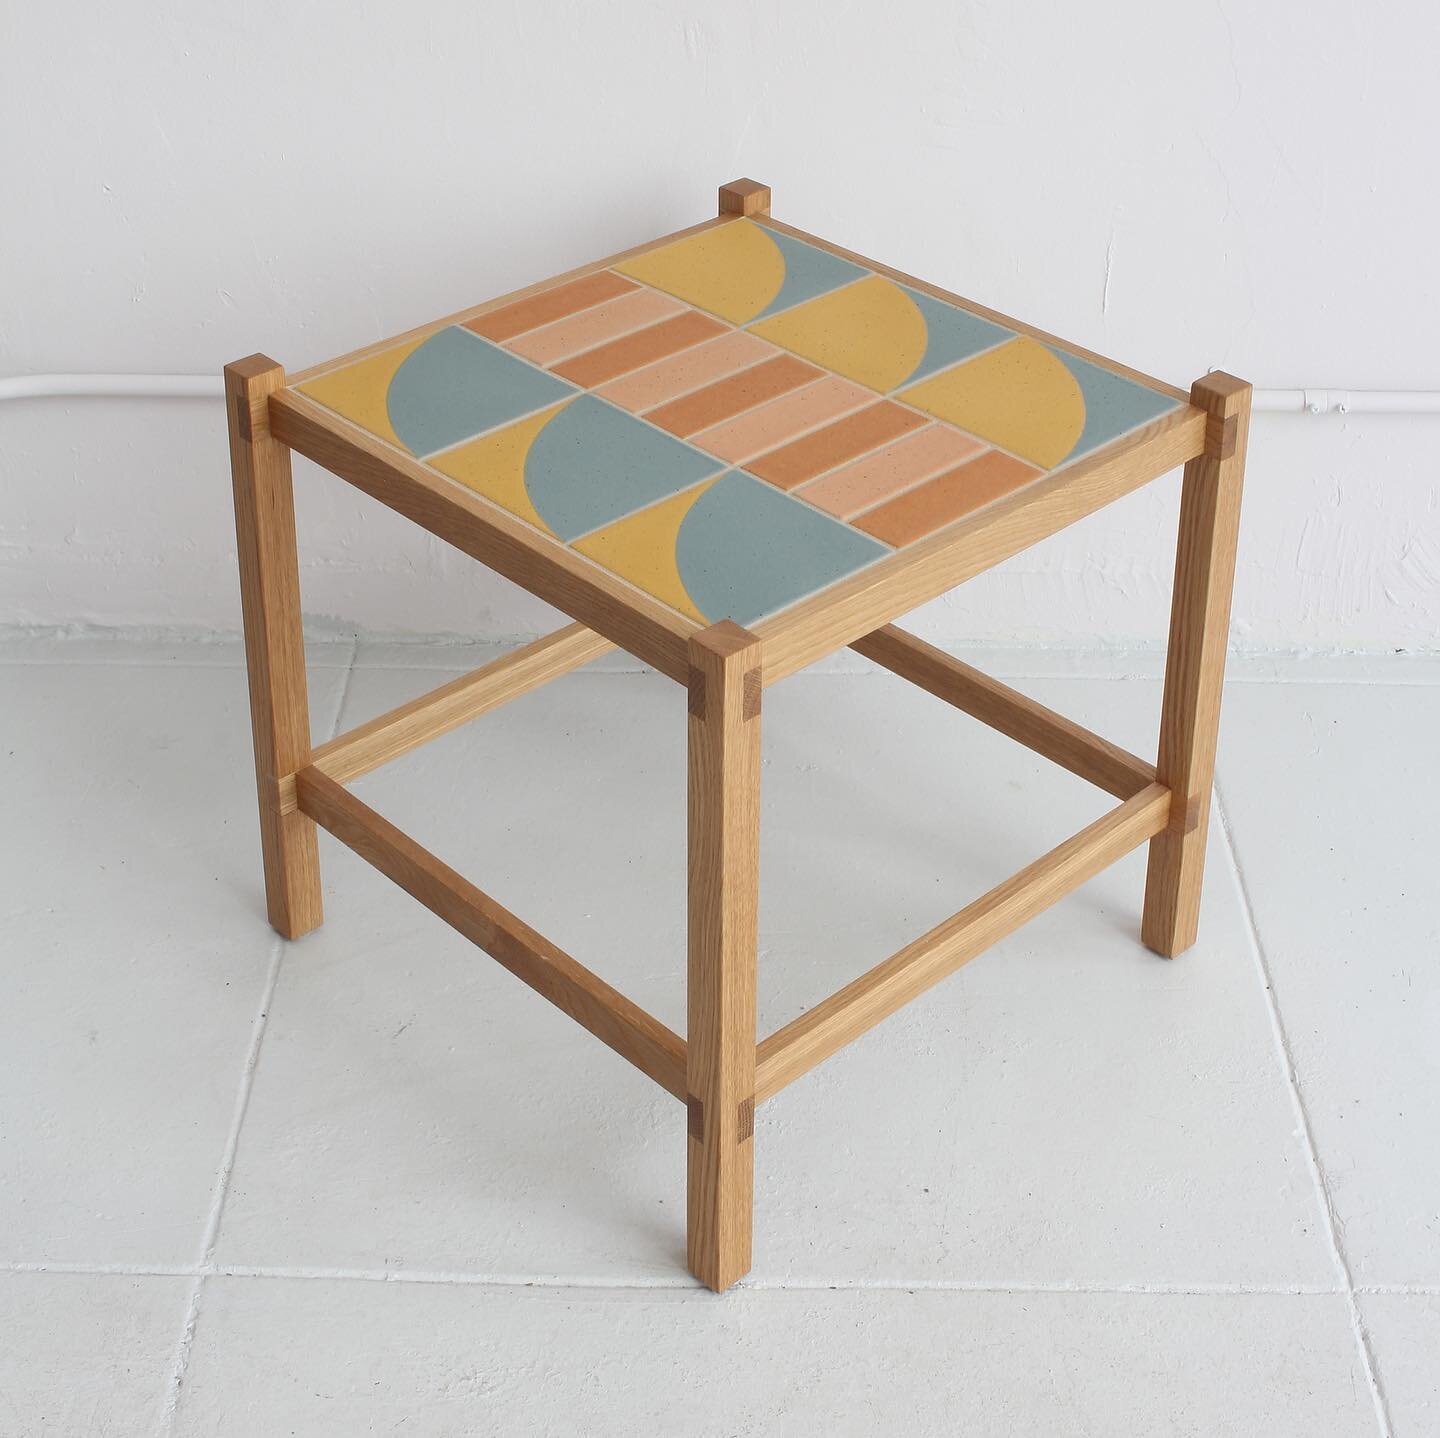 I was honored to collaborate with @katandroger on these tile side tables, together we created something much more than either of us could have on our own